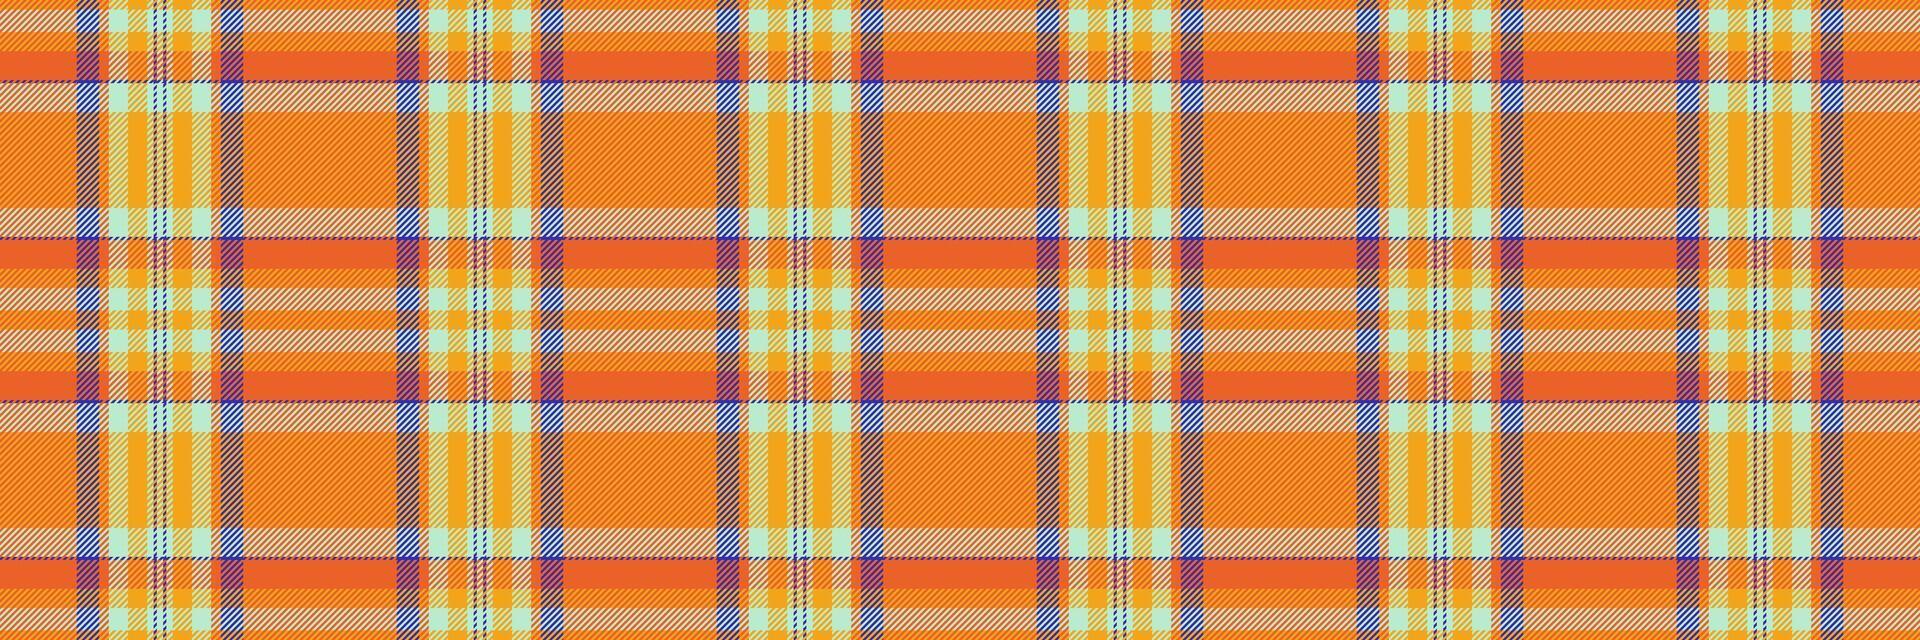 Attire vector seamless background, towel textile tartan plaid. Graphic pattern check fabric texture in orange and amber colors.